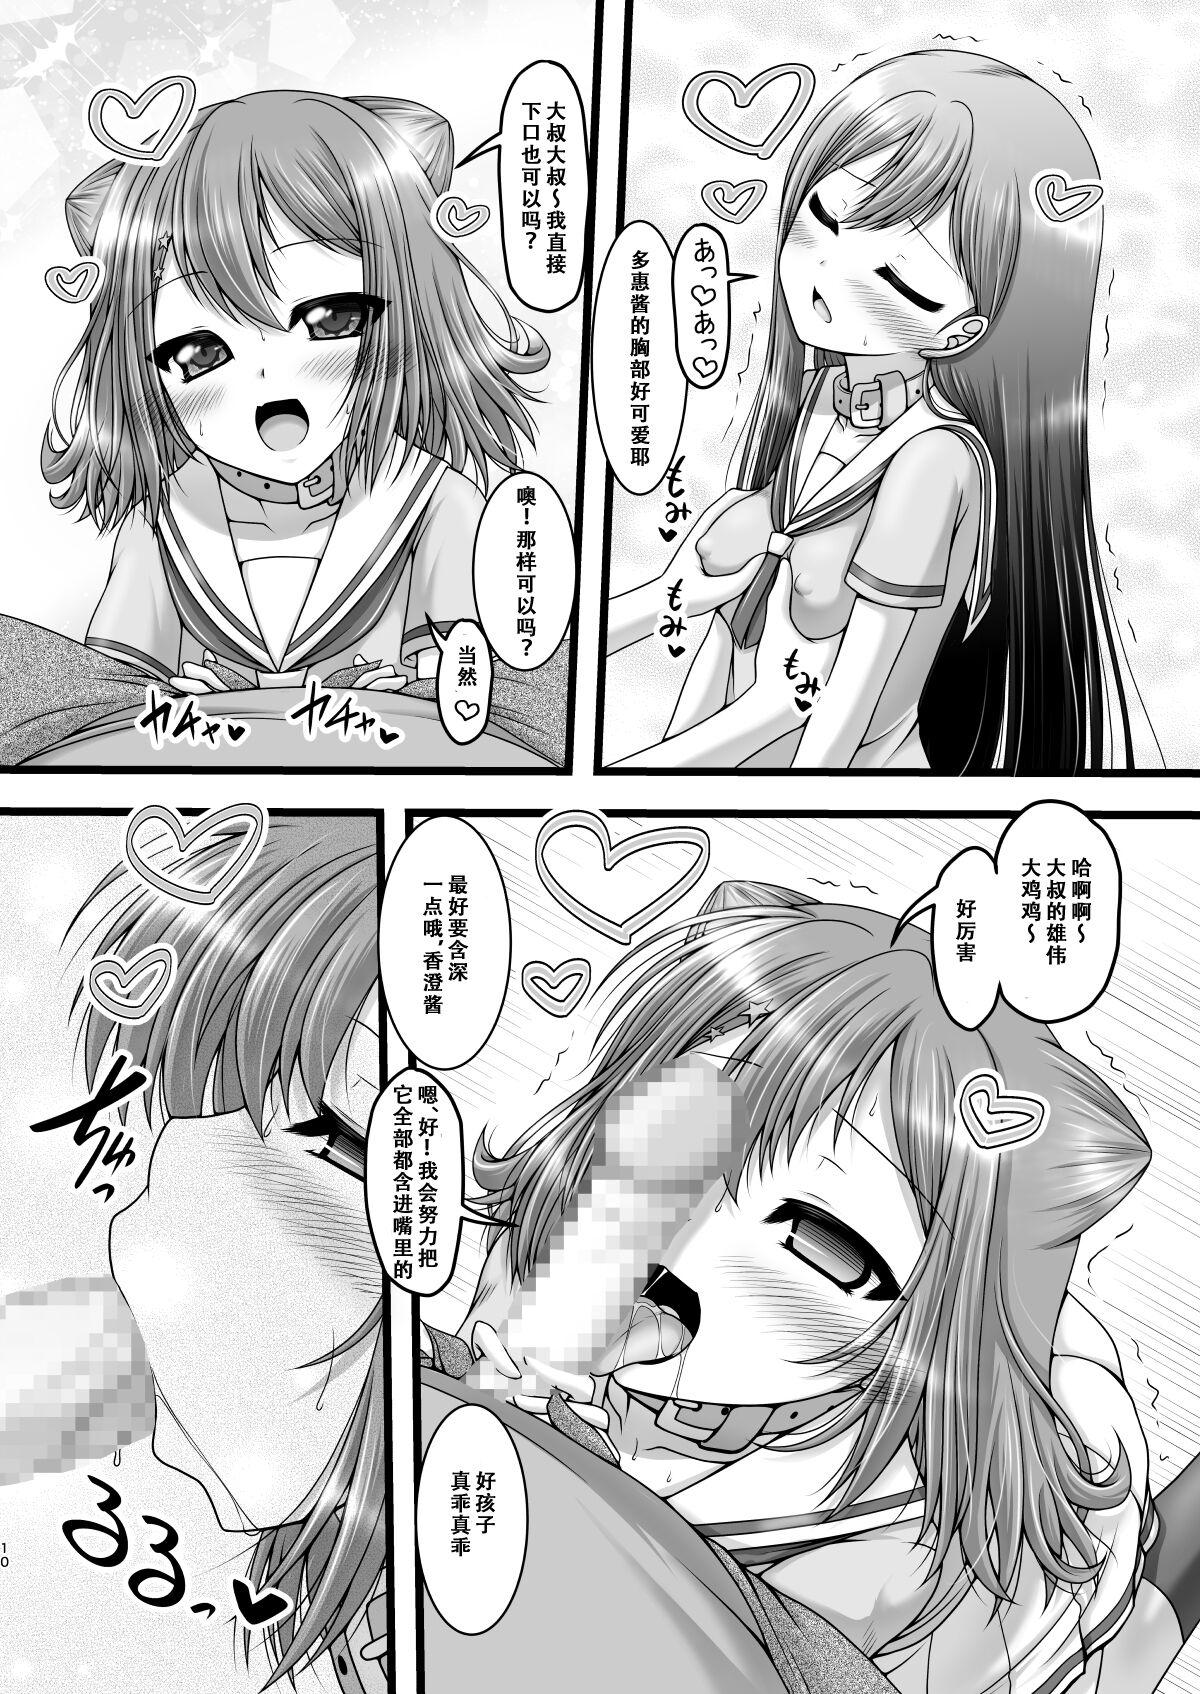 Massages Twinkle Express - Bang dream Jacking Off - Page 10